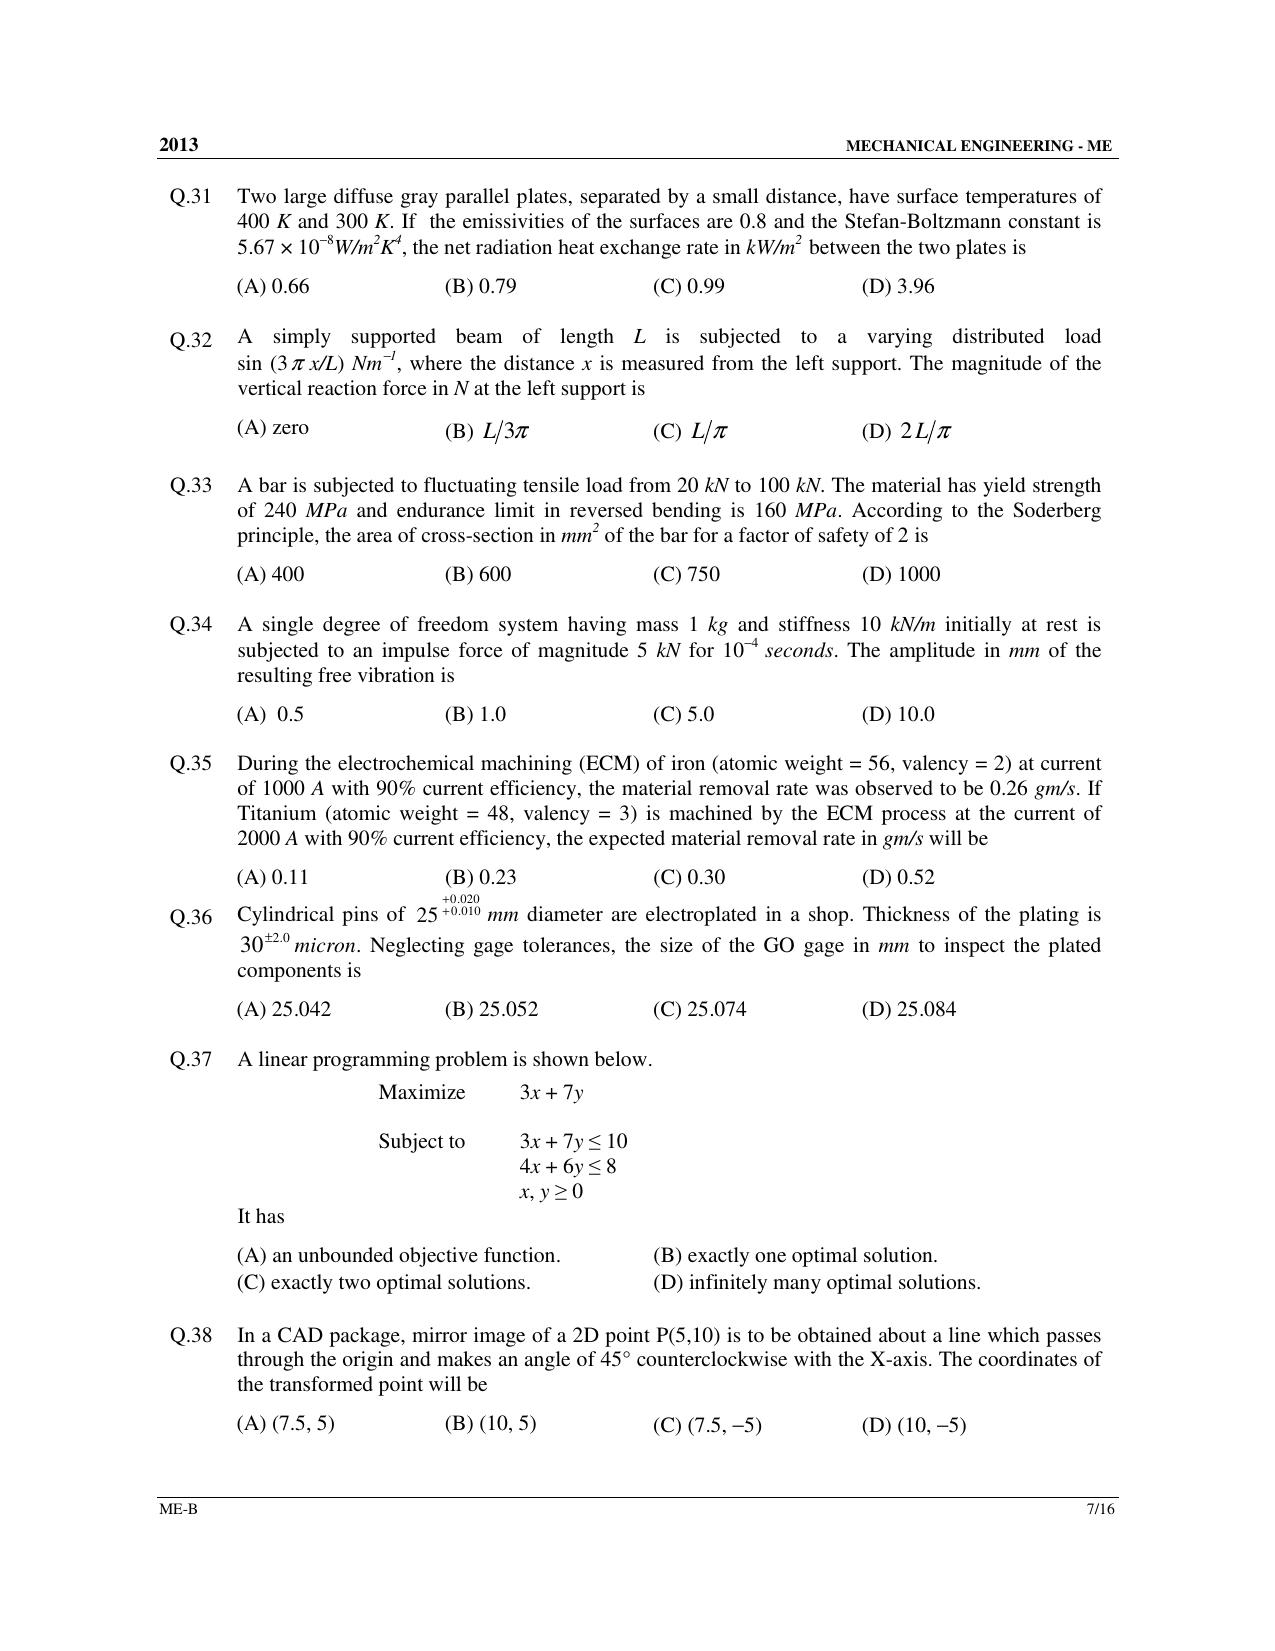 GATE 2013 Mechanical Engineering (ME) Question Paper with Answer Key - Page 22